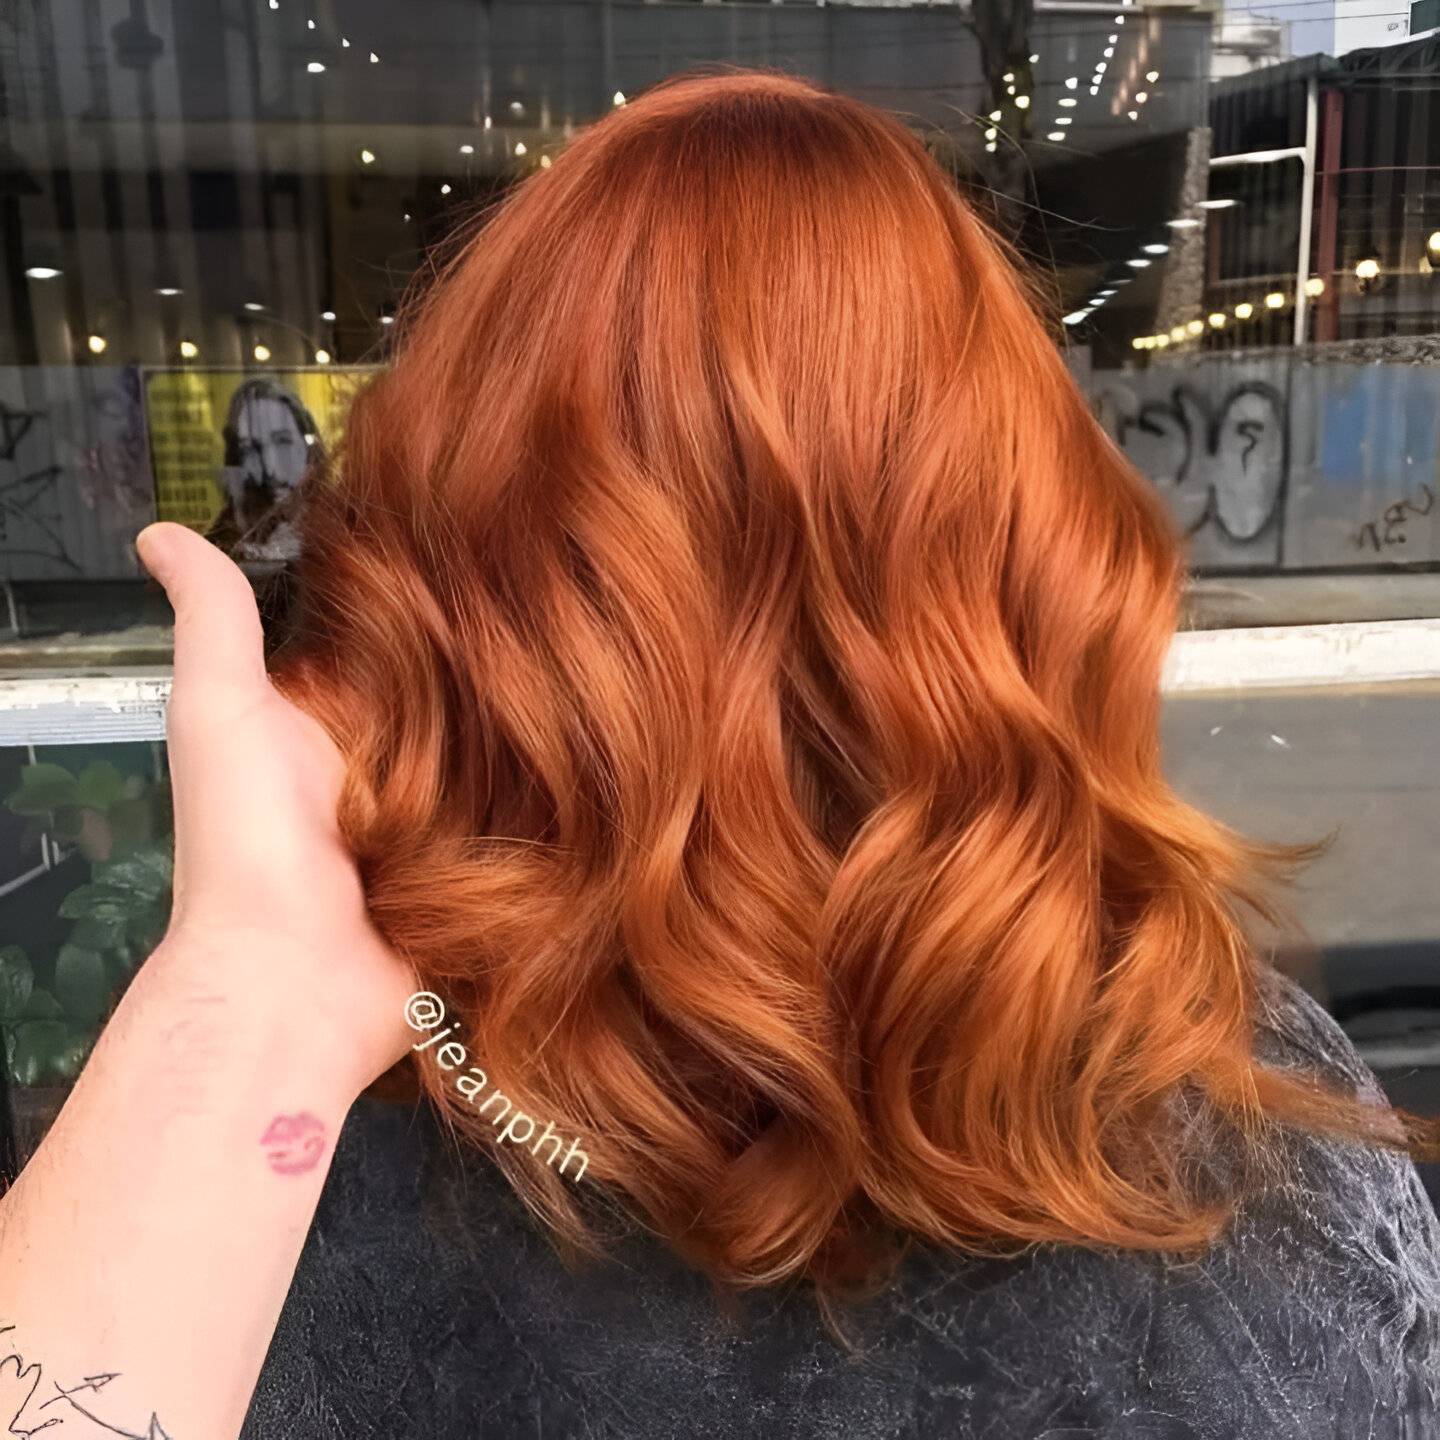 25 Gorgeous Orange Hair Ideas To Look Stunning Like A Model - 211